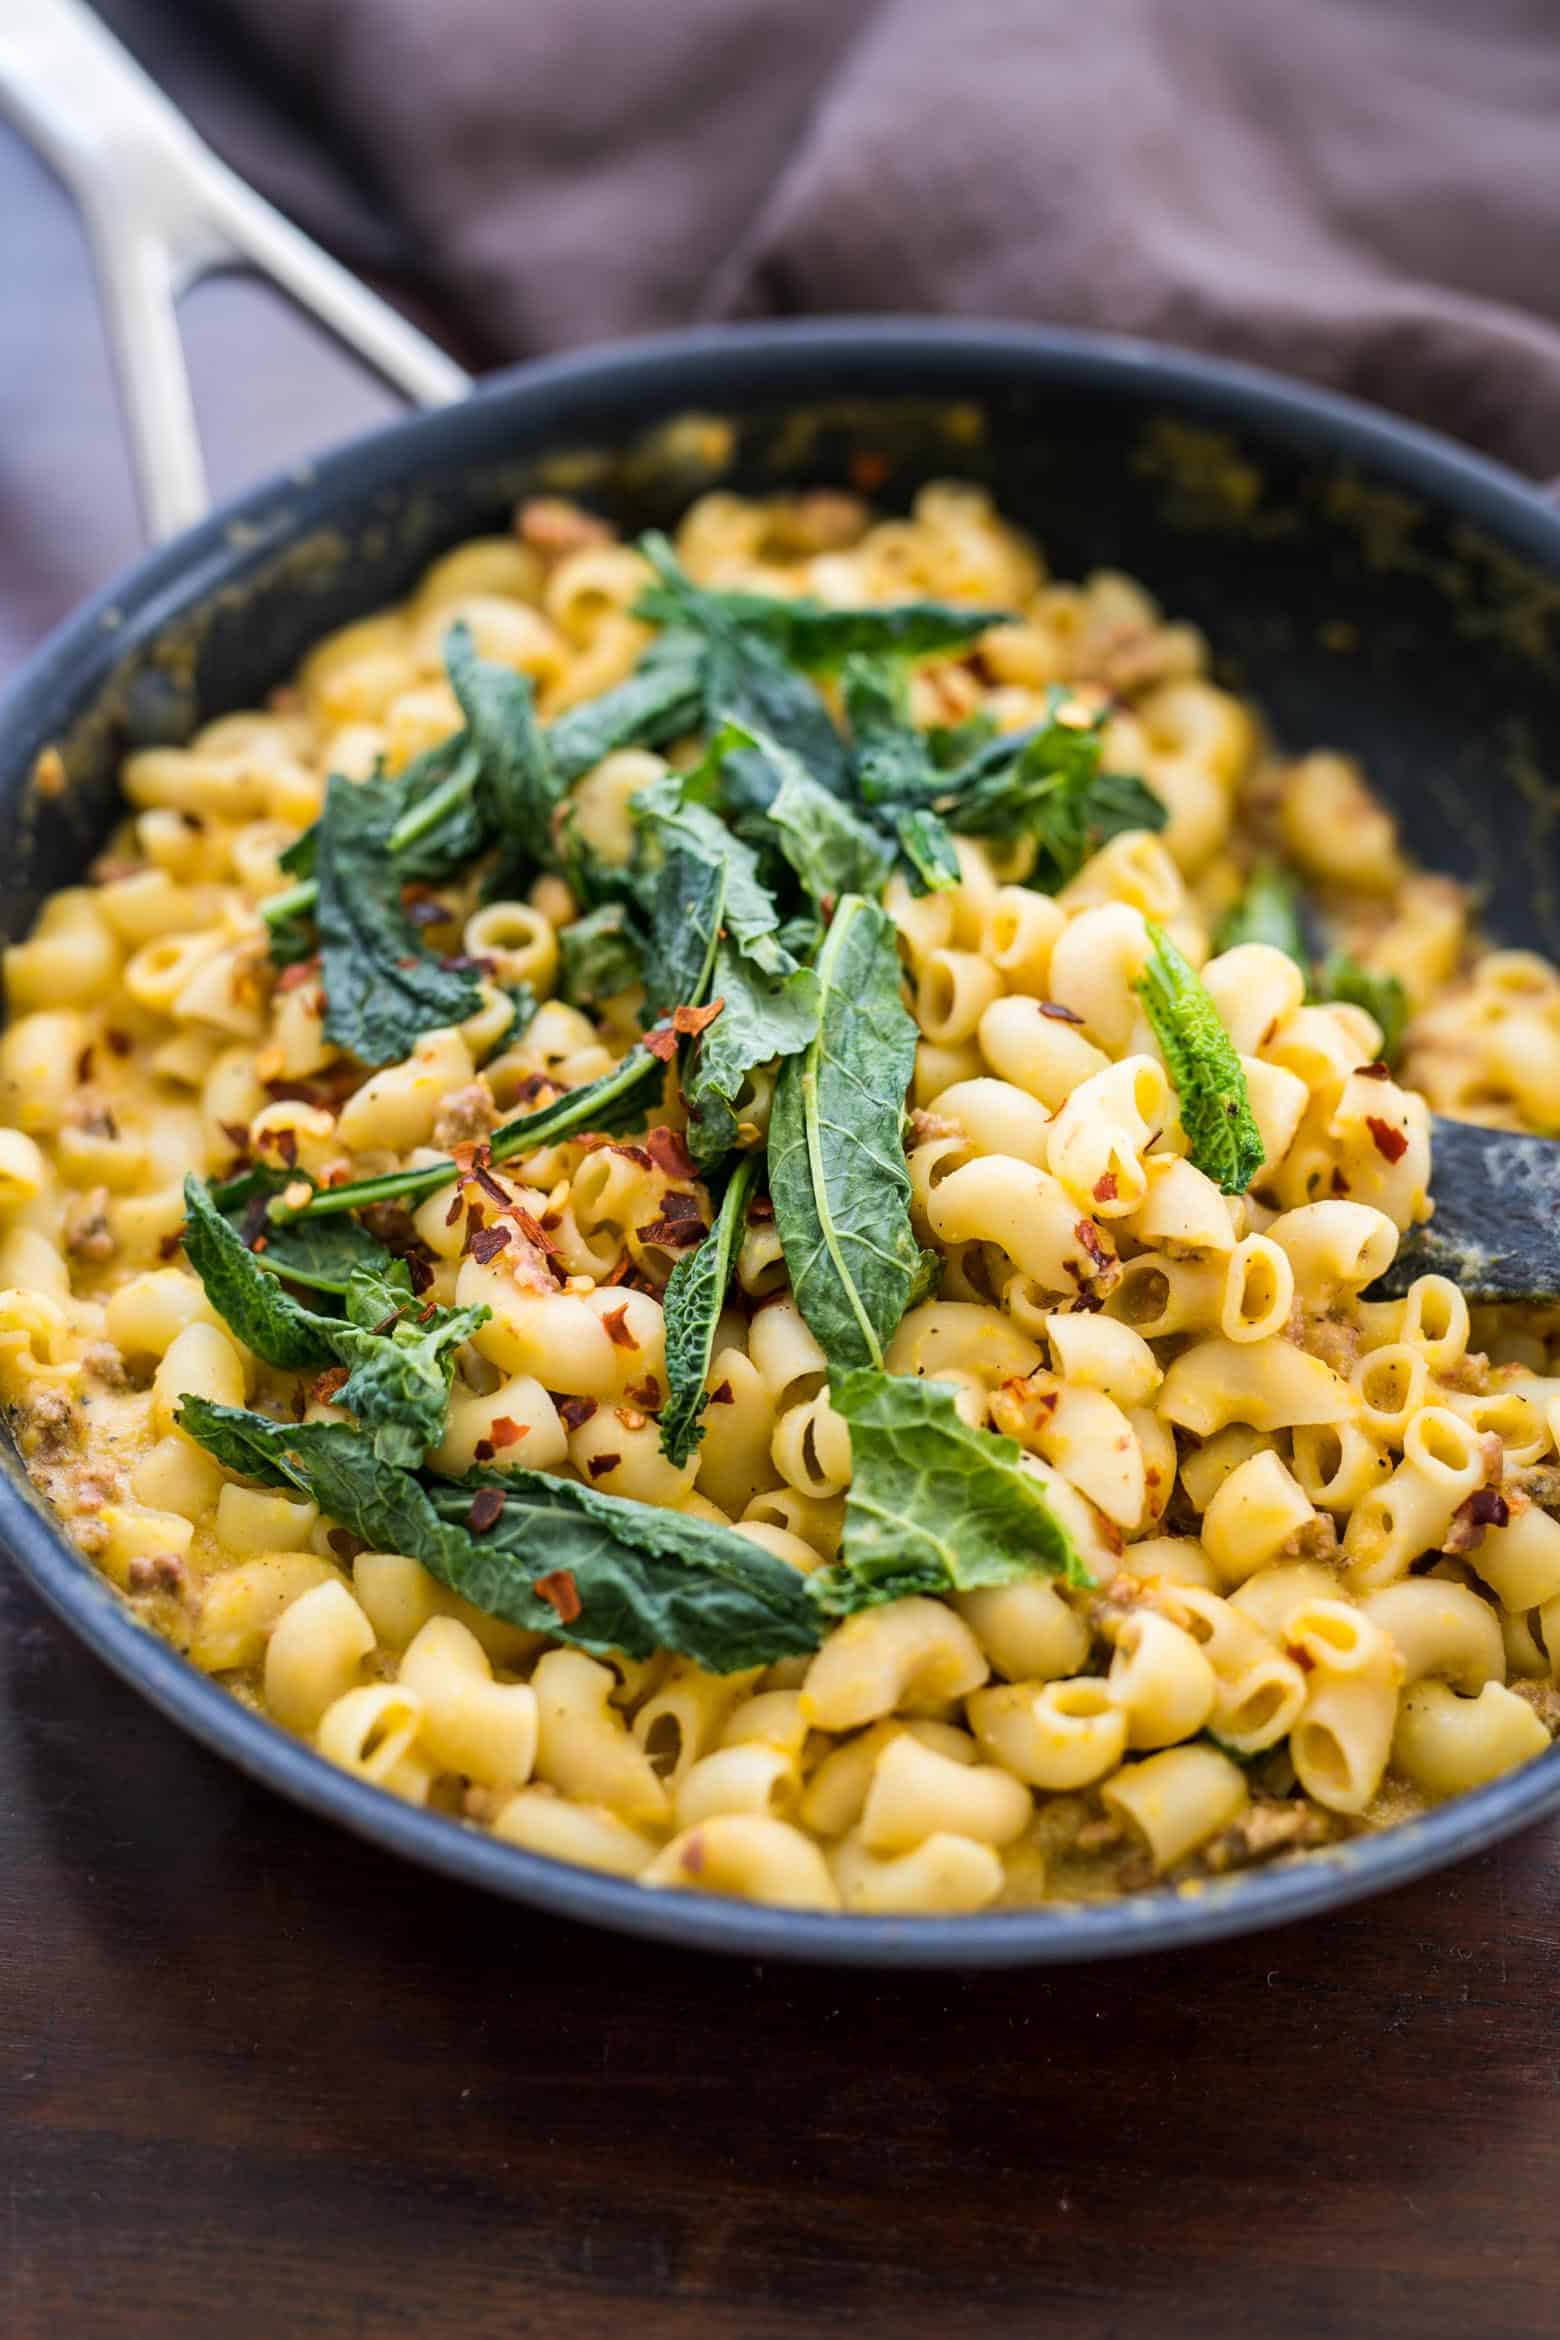 Creamy pumpkin sausage mac and cheese with kale is pure comfort food! It's a fast, easy dinner recipe when you crave homemade pasta in a bowl.